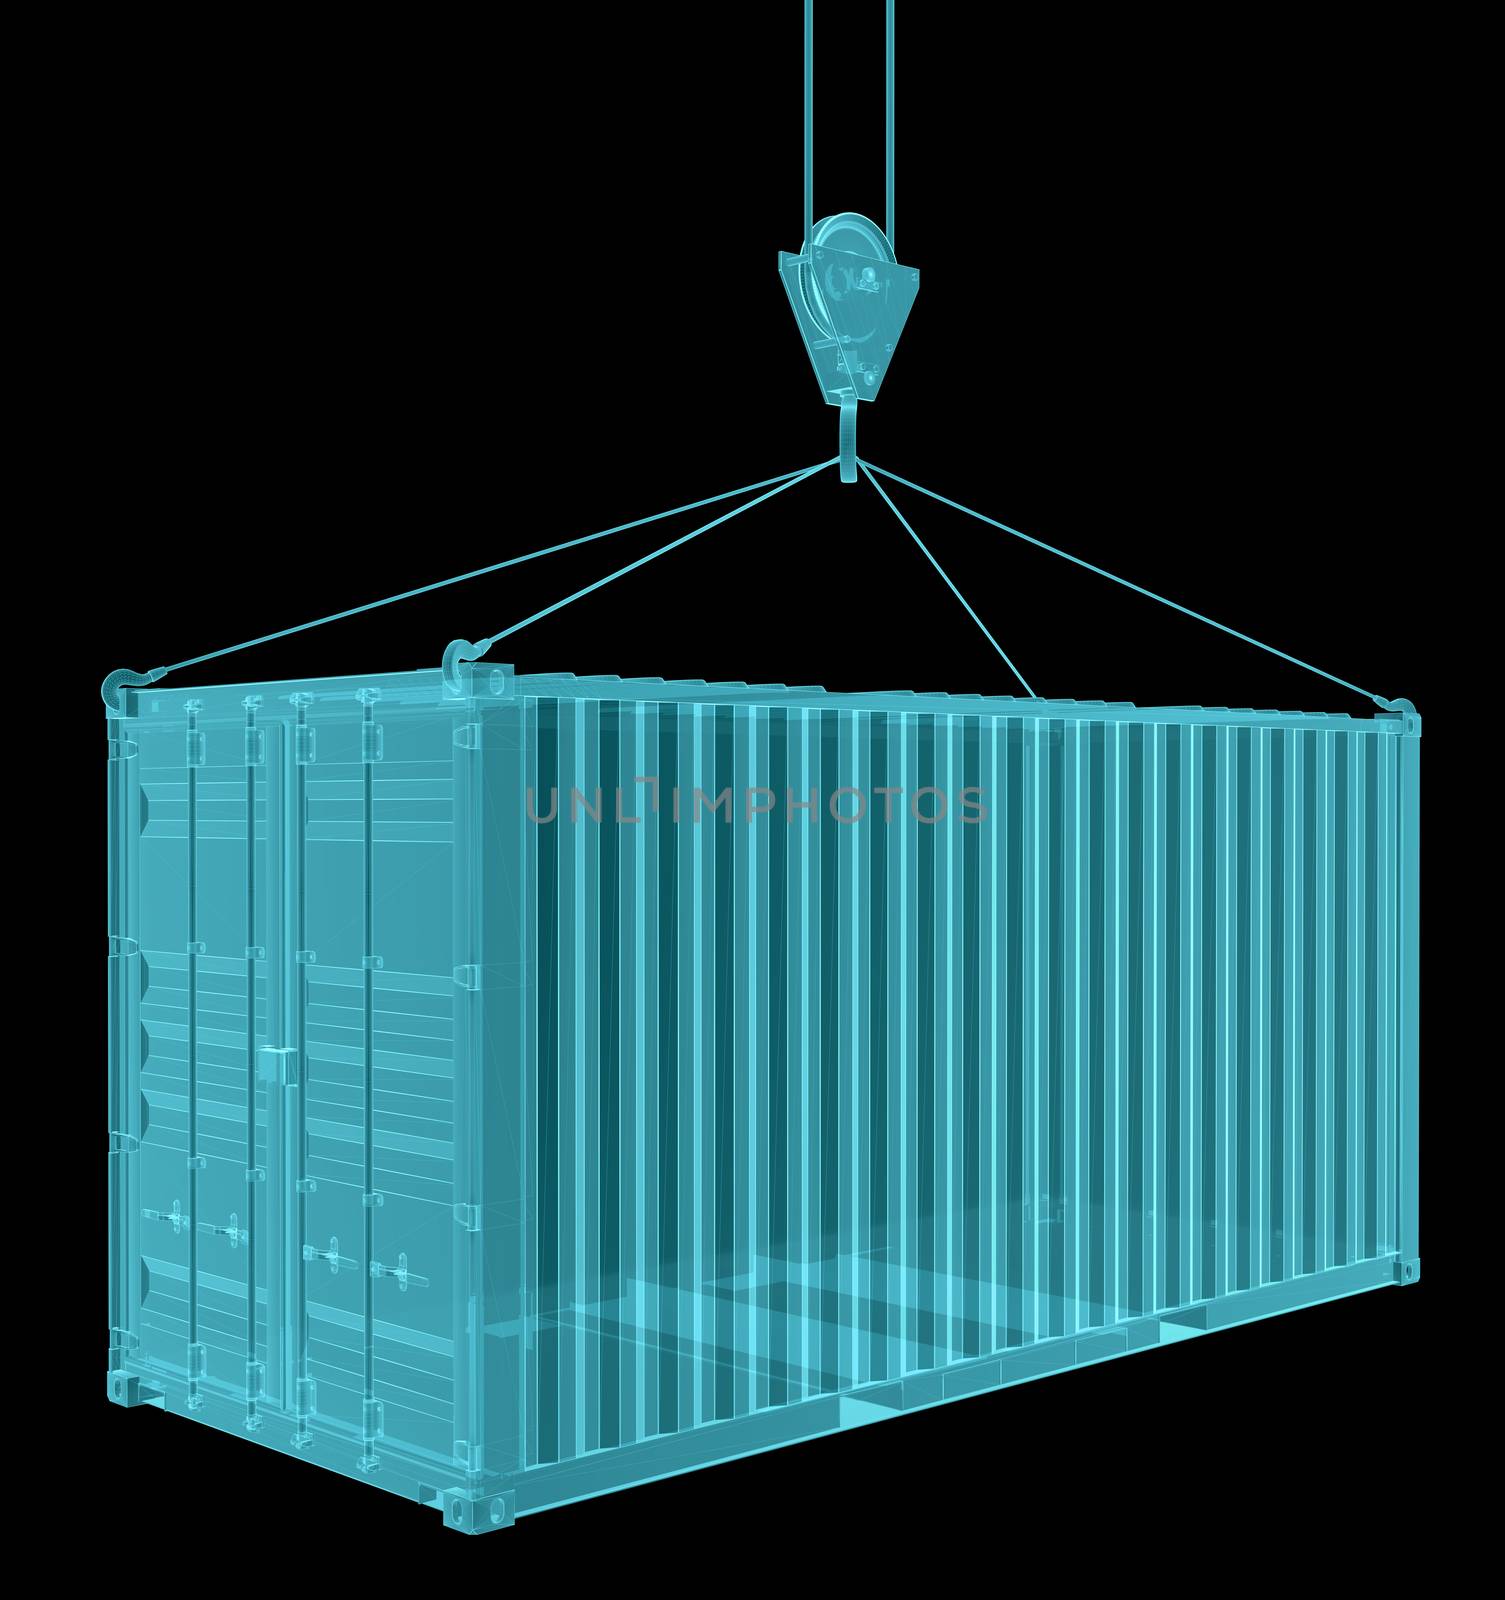 X-Ray Image Of Shipping container with hook by cherezoff